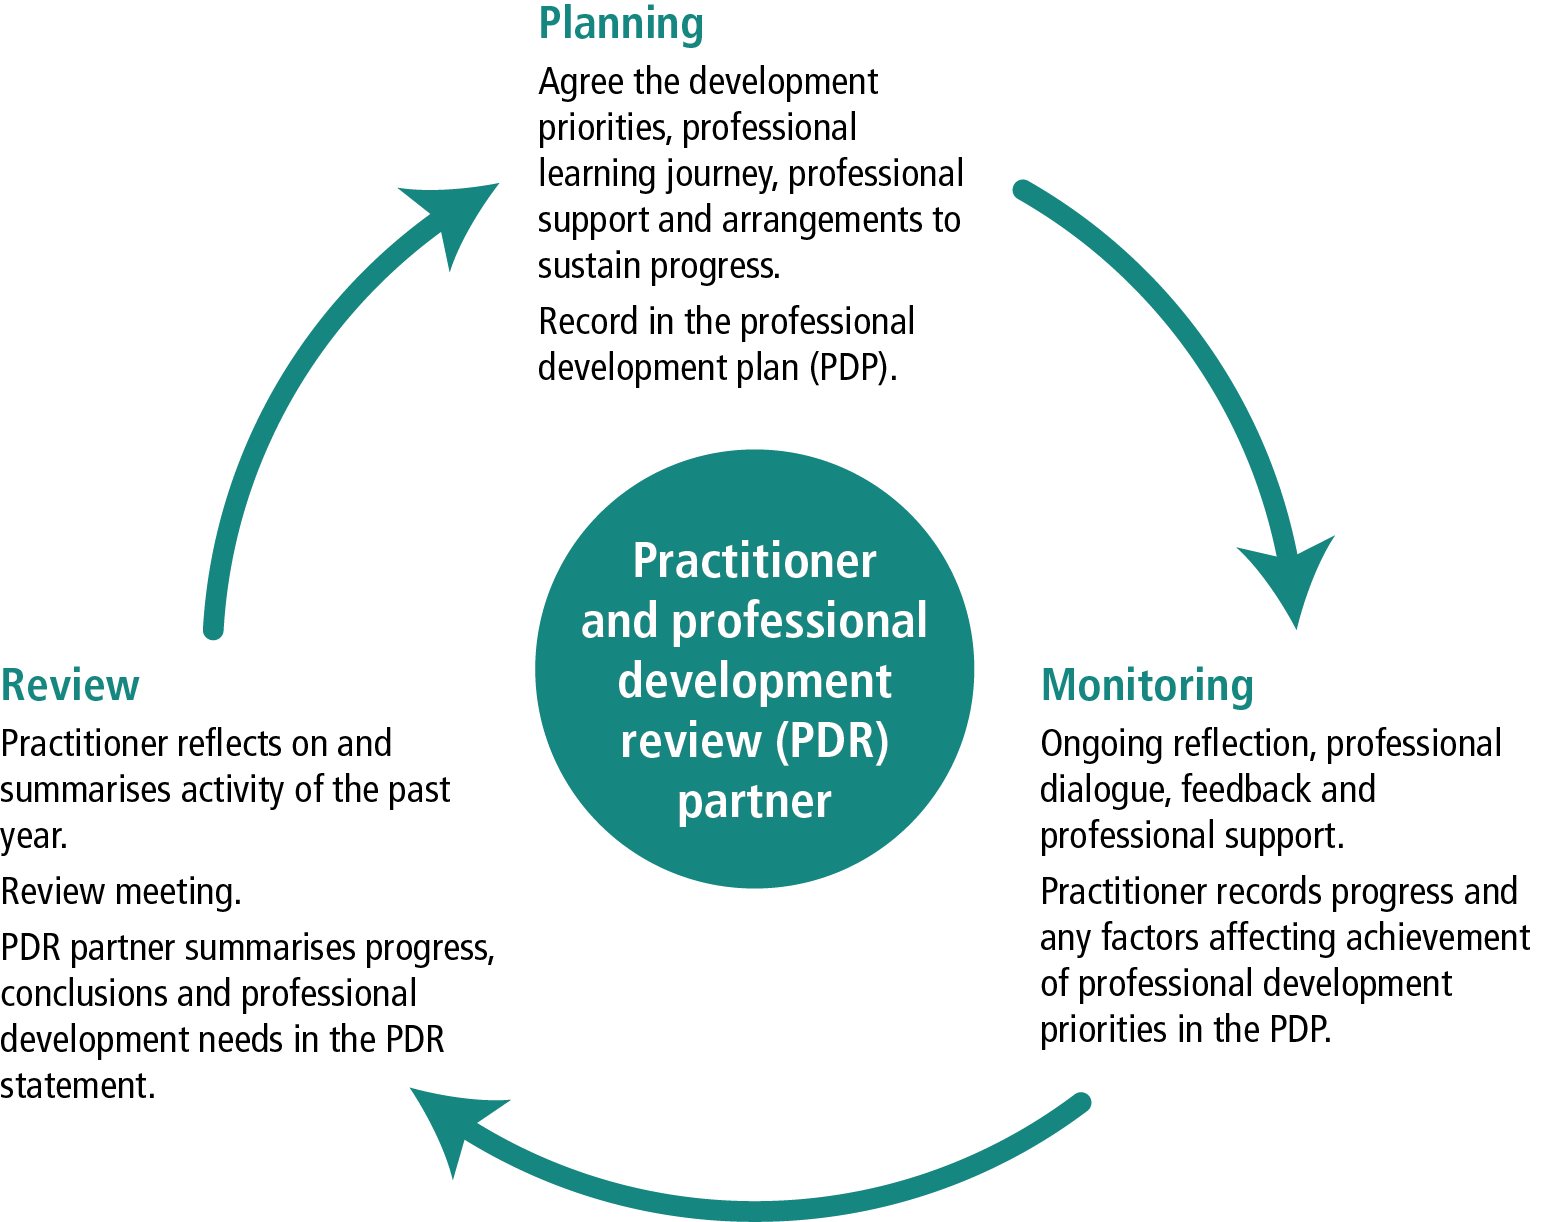 The circular diagram shows the 3 elements of the PDR cycle that the practitioner and professional development review partner will engage with during the year. The cycle begins with planning, continues with monitoring and ends with the review meeting.